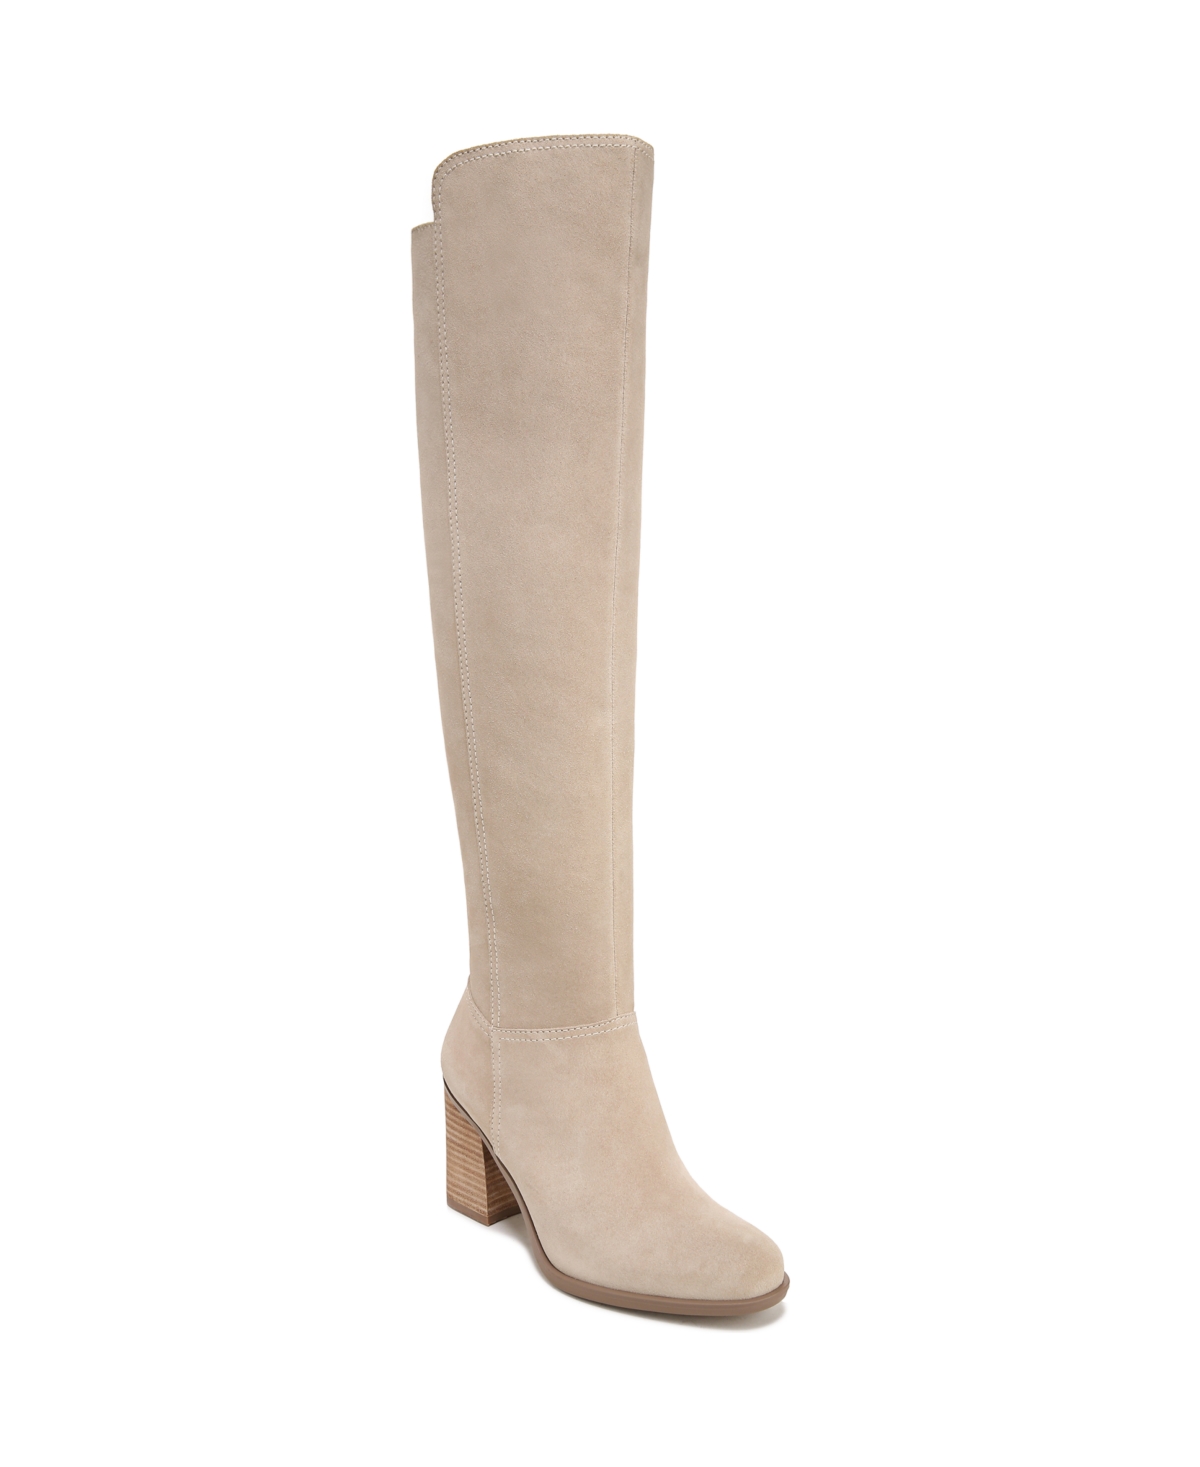 Kyrie Water-Resistant Over-the-Knee Boots - Porcelain Suede